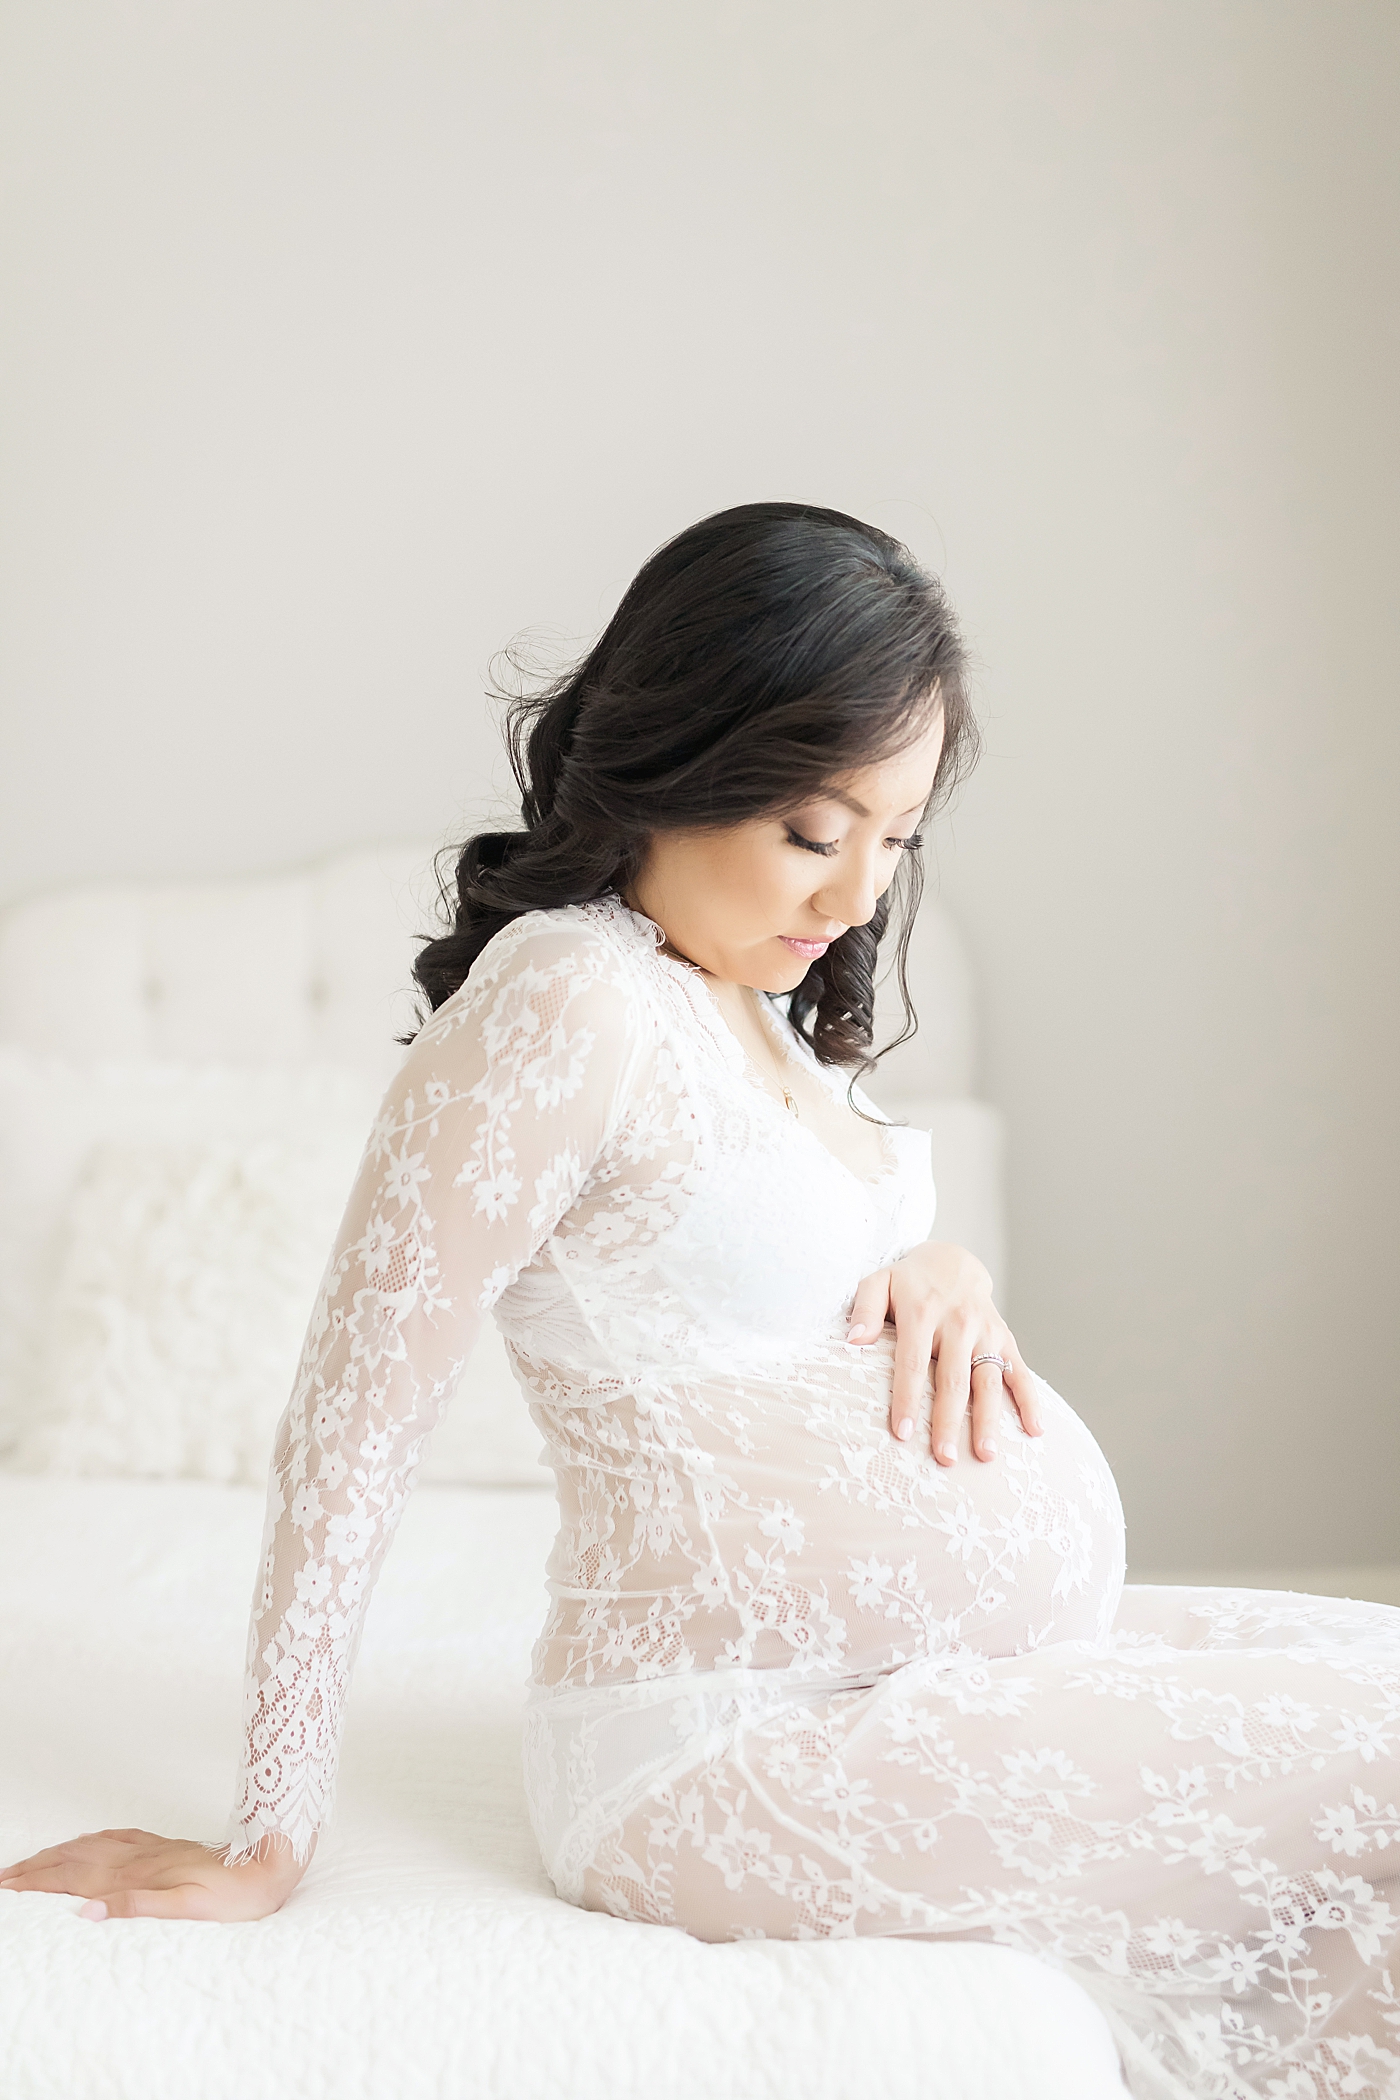 Intimate maternity portraits in studio in Houston, TX. Photos by Fresh Light Photography.